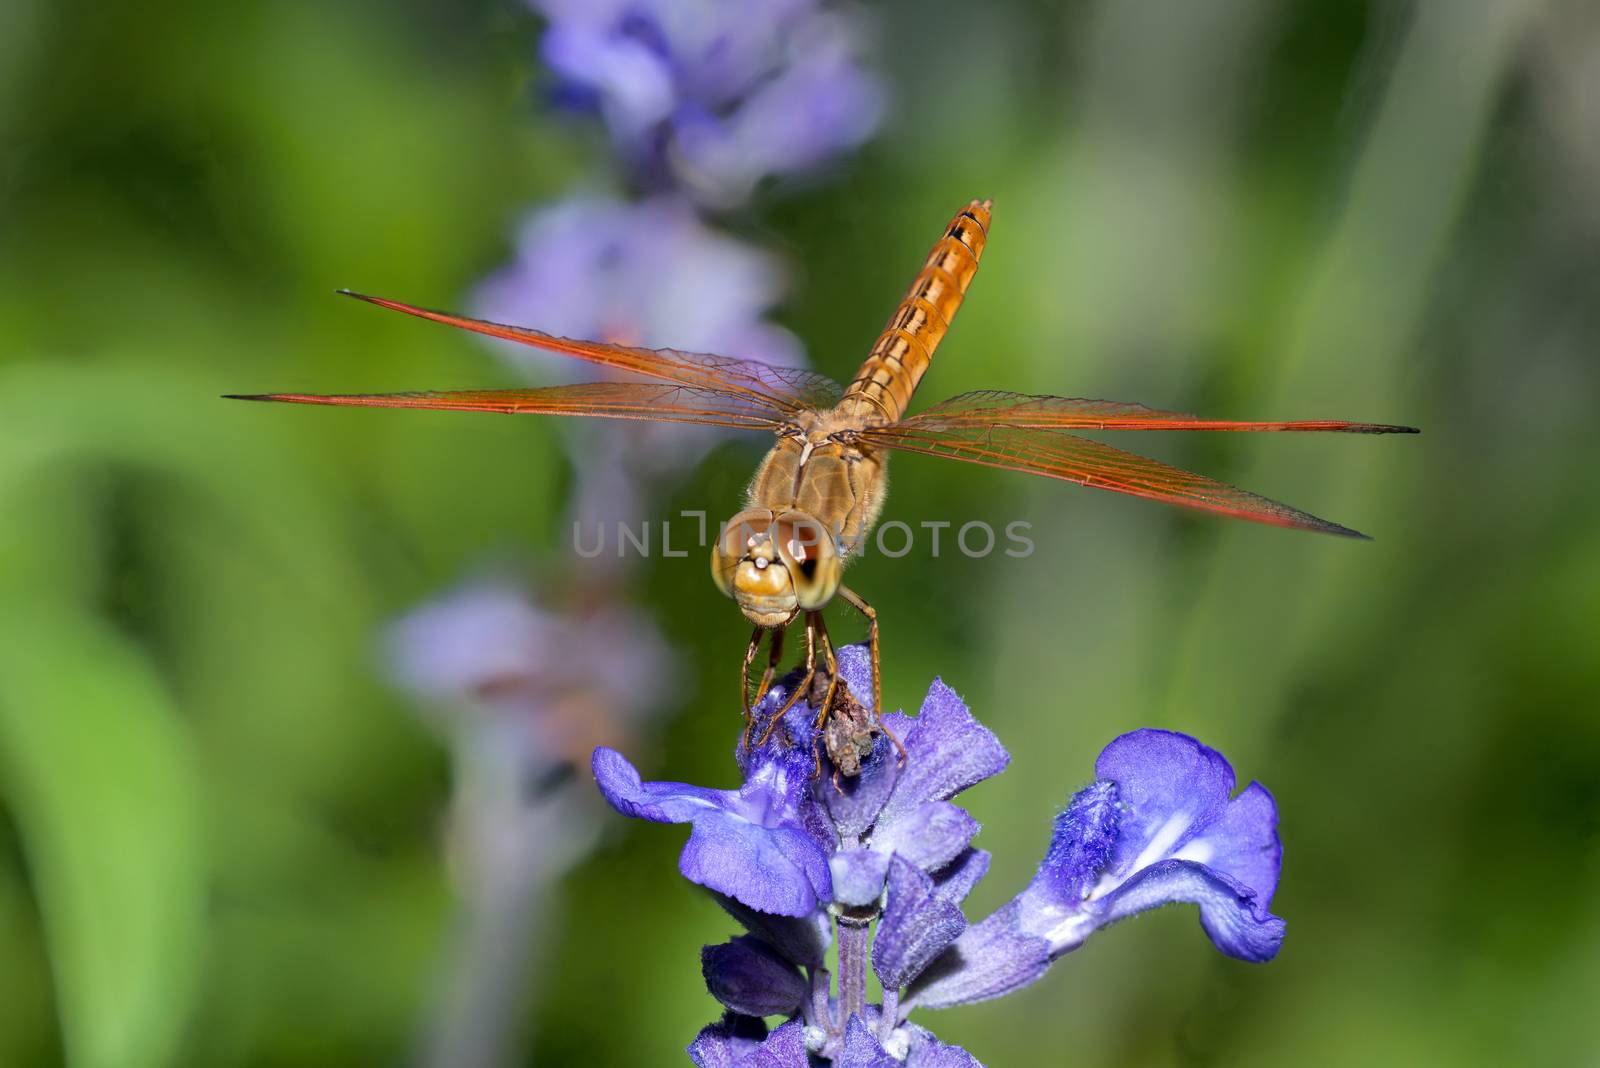 Closeup, dragonfly on blue flower in the garden